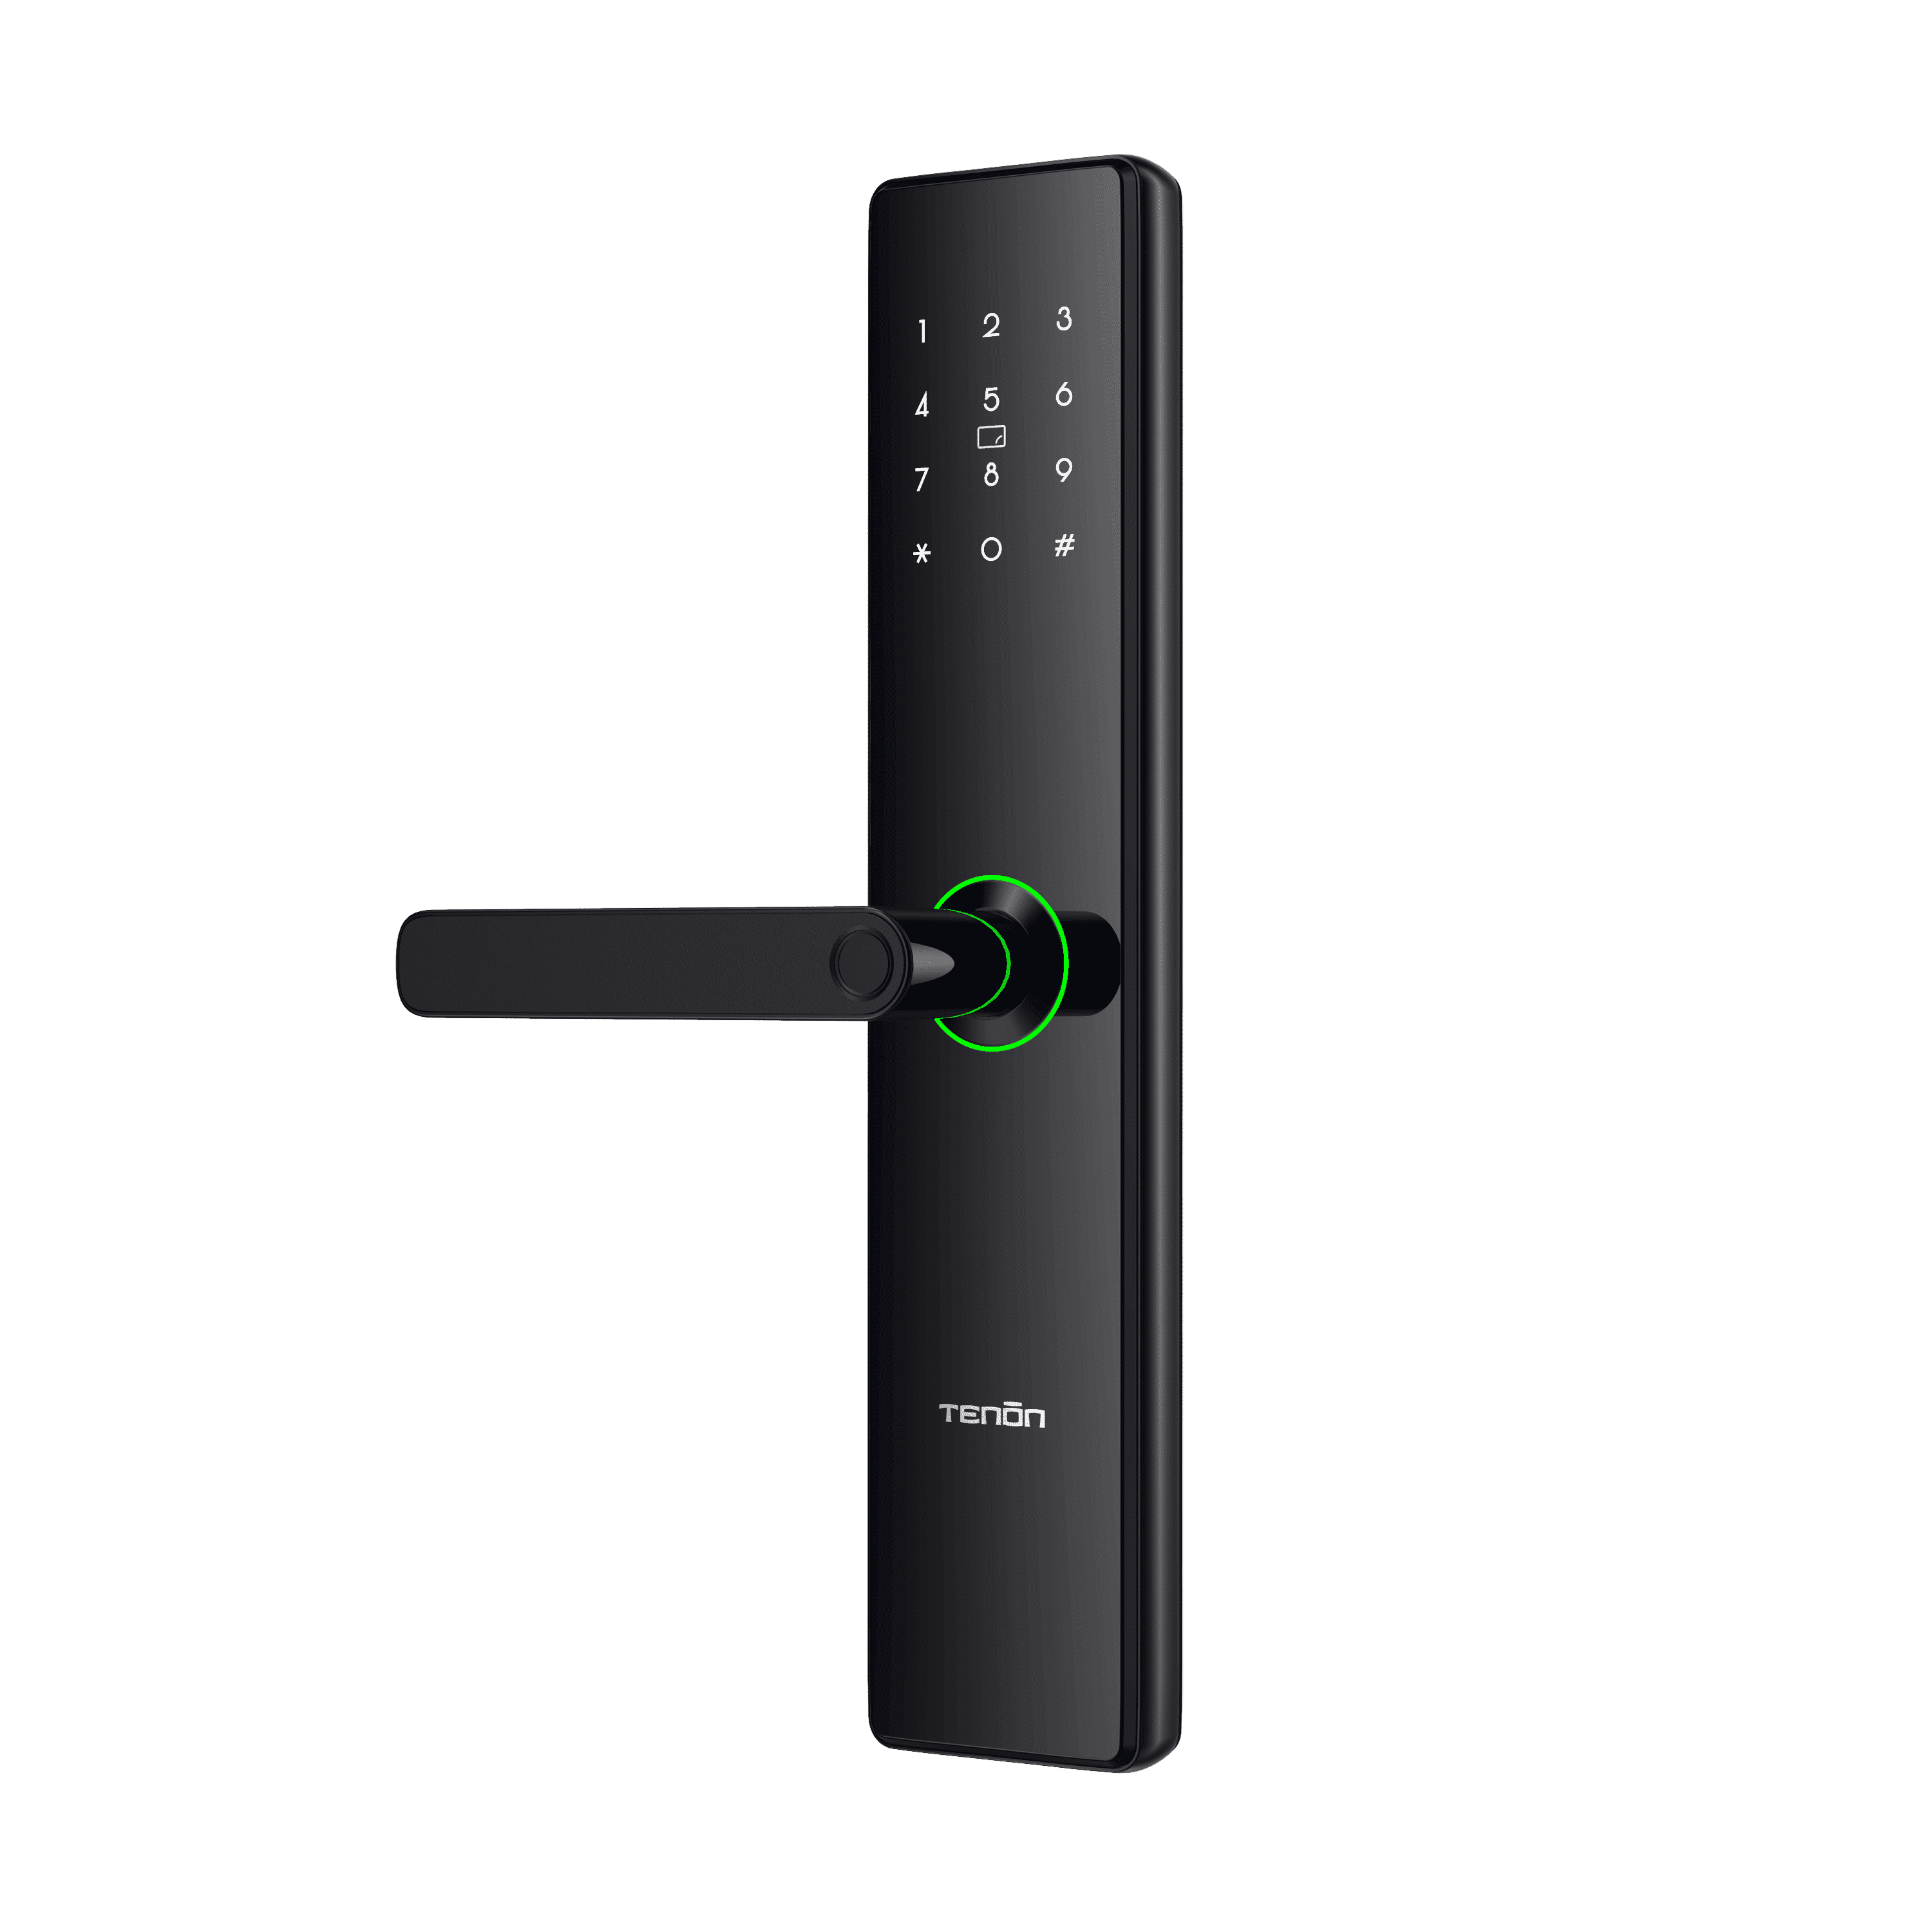 Acesso remoto Smart Touchpad Bluetooth-Enabled Smart Lock